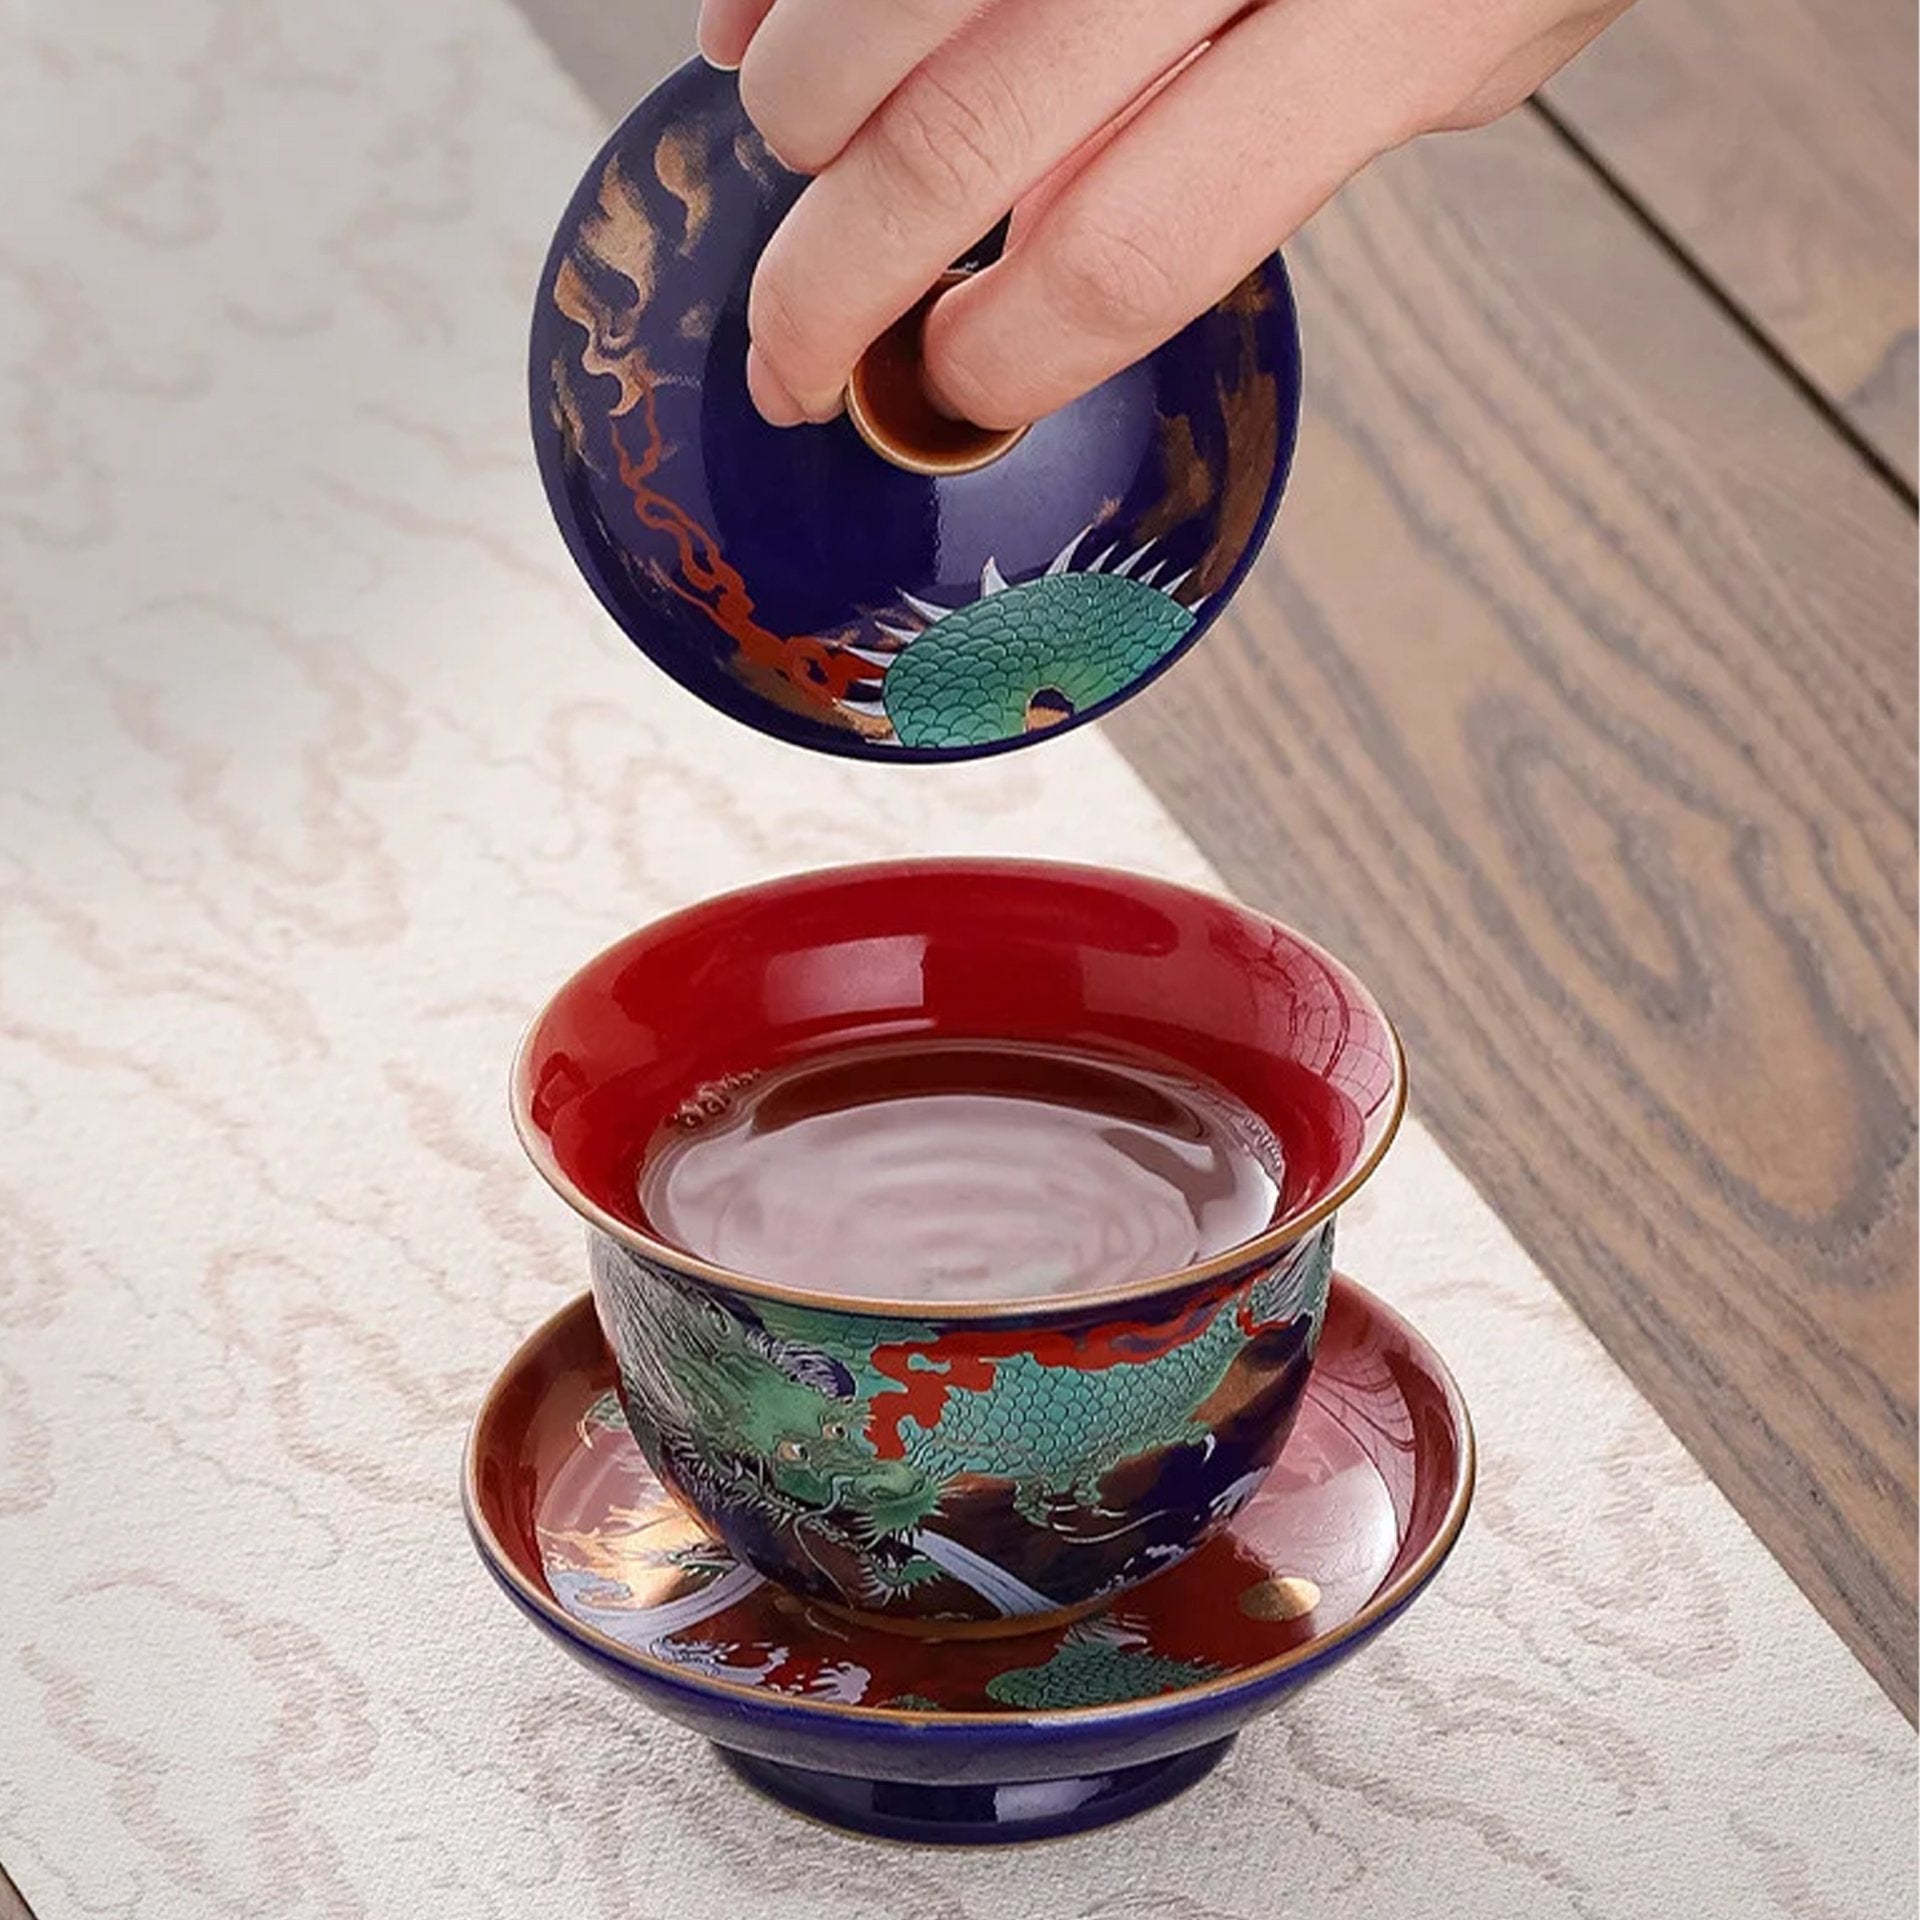 Dragon motif gaiwan held in hand over a red saucer.